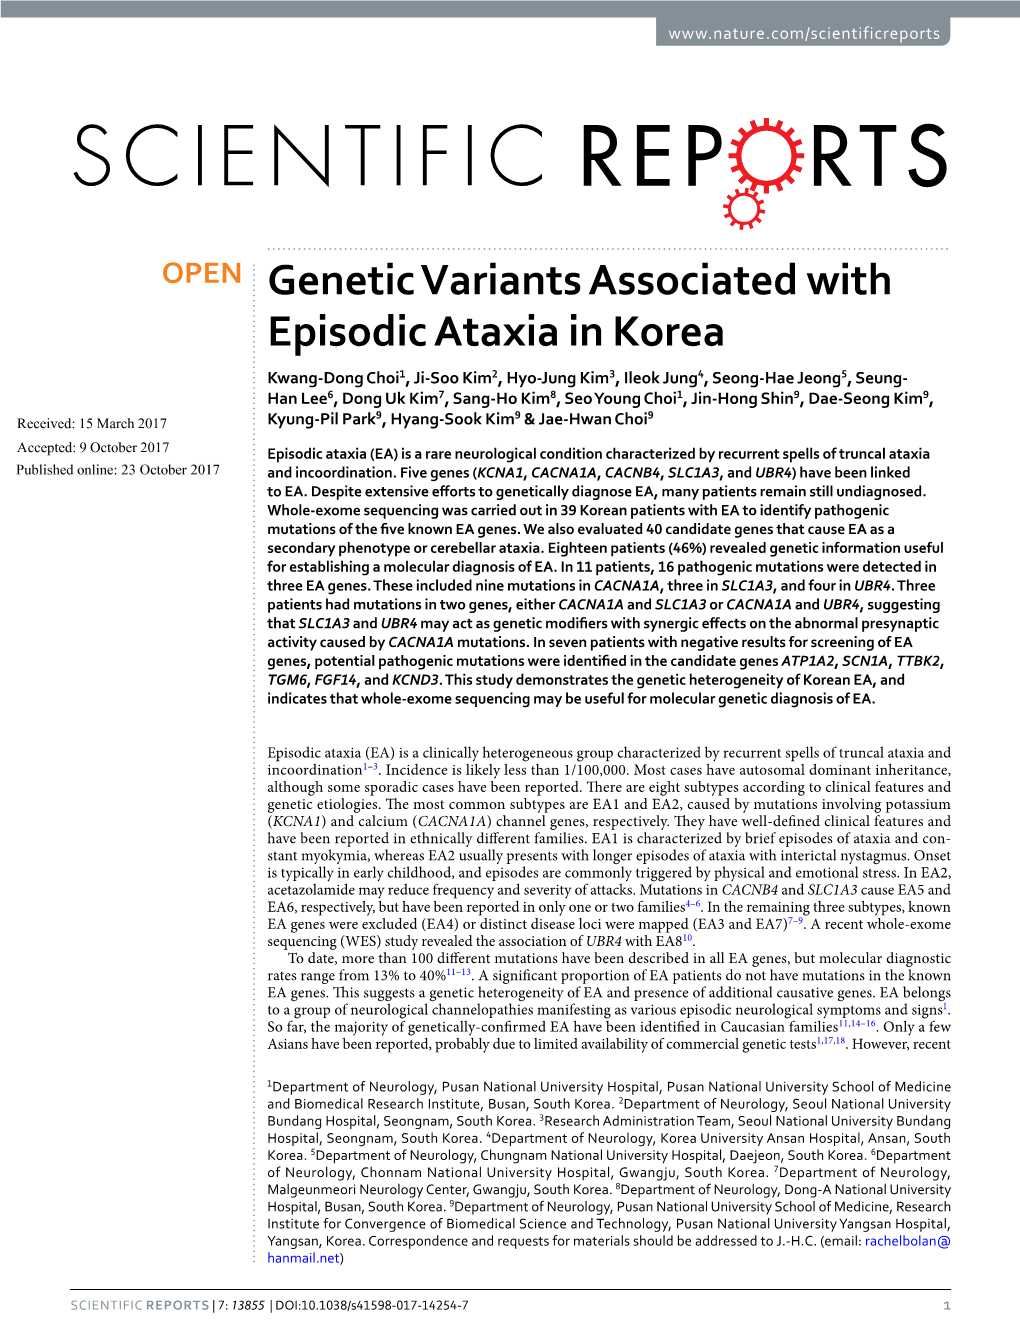 Genetic Variants Associated with Episodic Ataxia in Korea